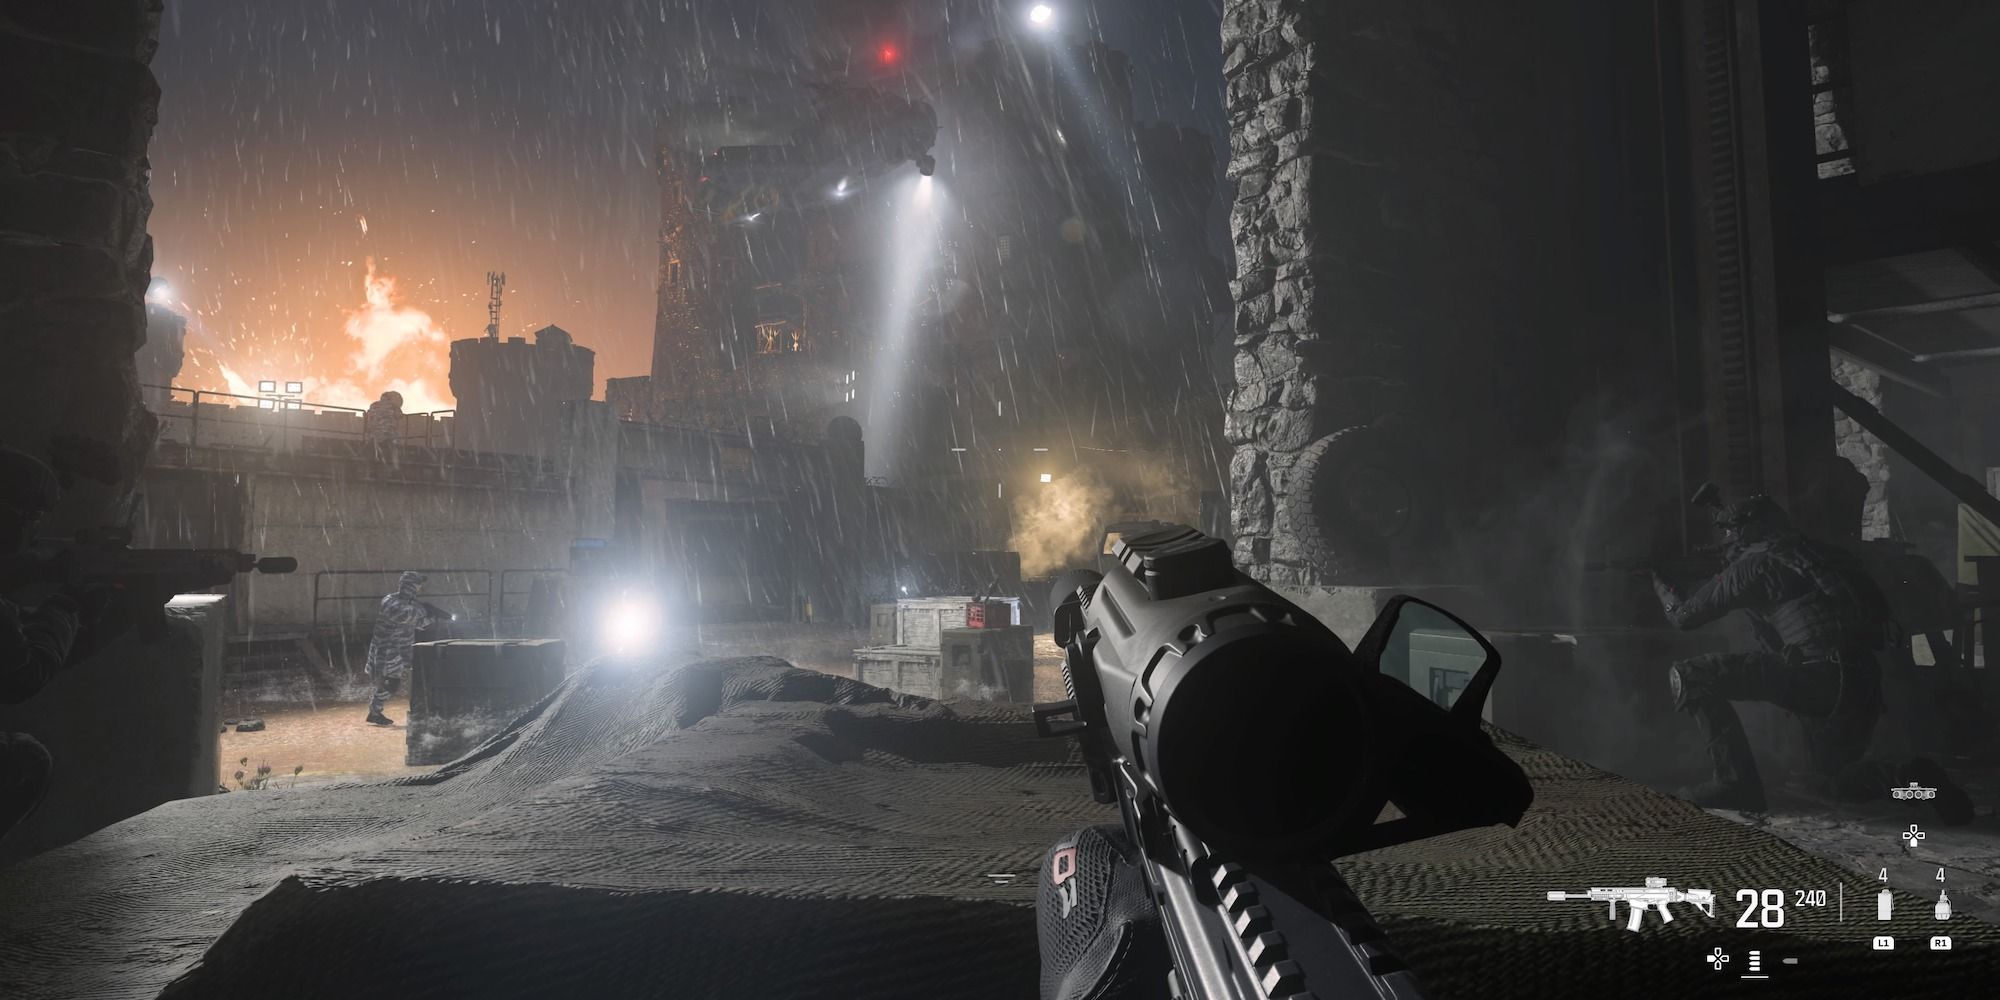 Call of Duty Modern Warfare 3 single player review - was it rushed?